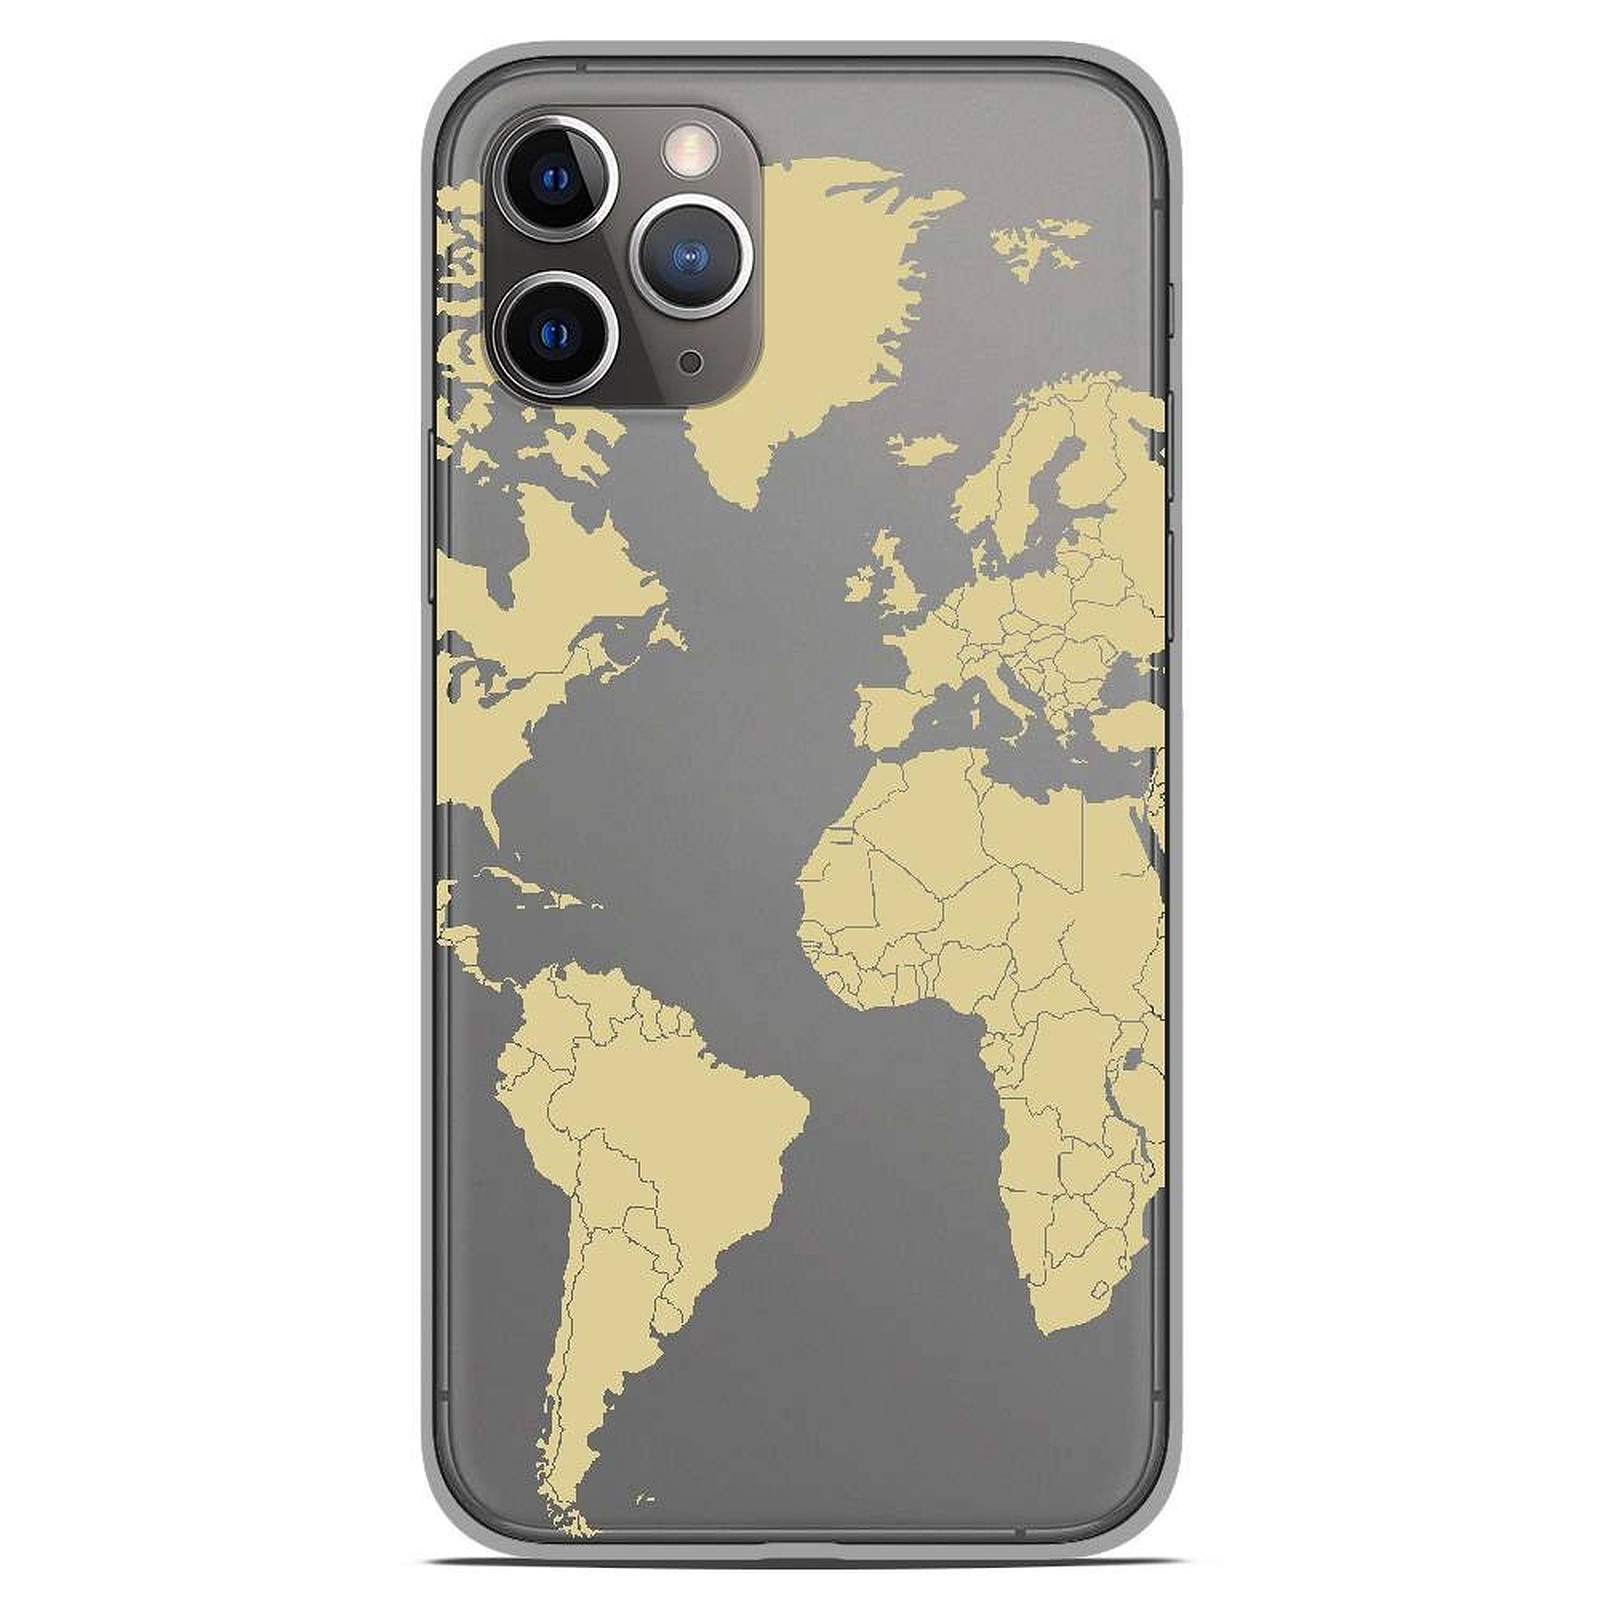 1001 Coques Coque silicone gel Apple iPhone 11 Pro motif Map beige - Coque telephone 1001Coques